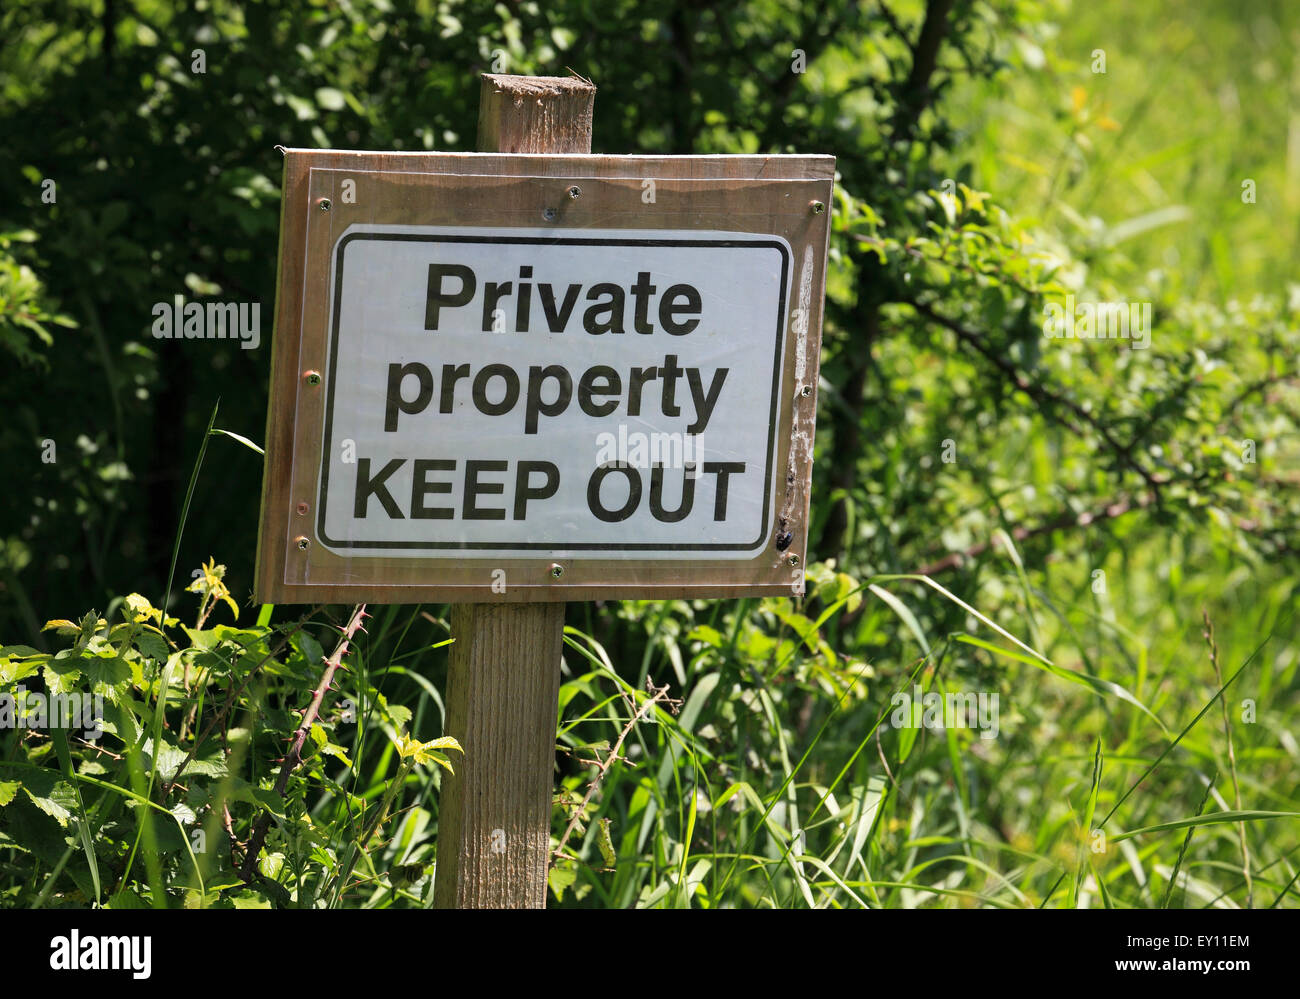 'Private property KEEP OUT' on a sign. Stock Photo